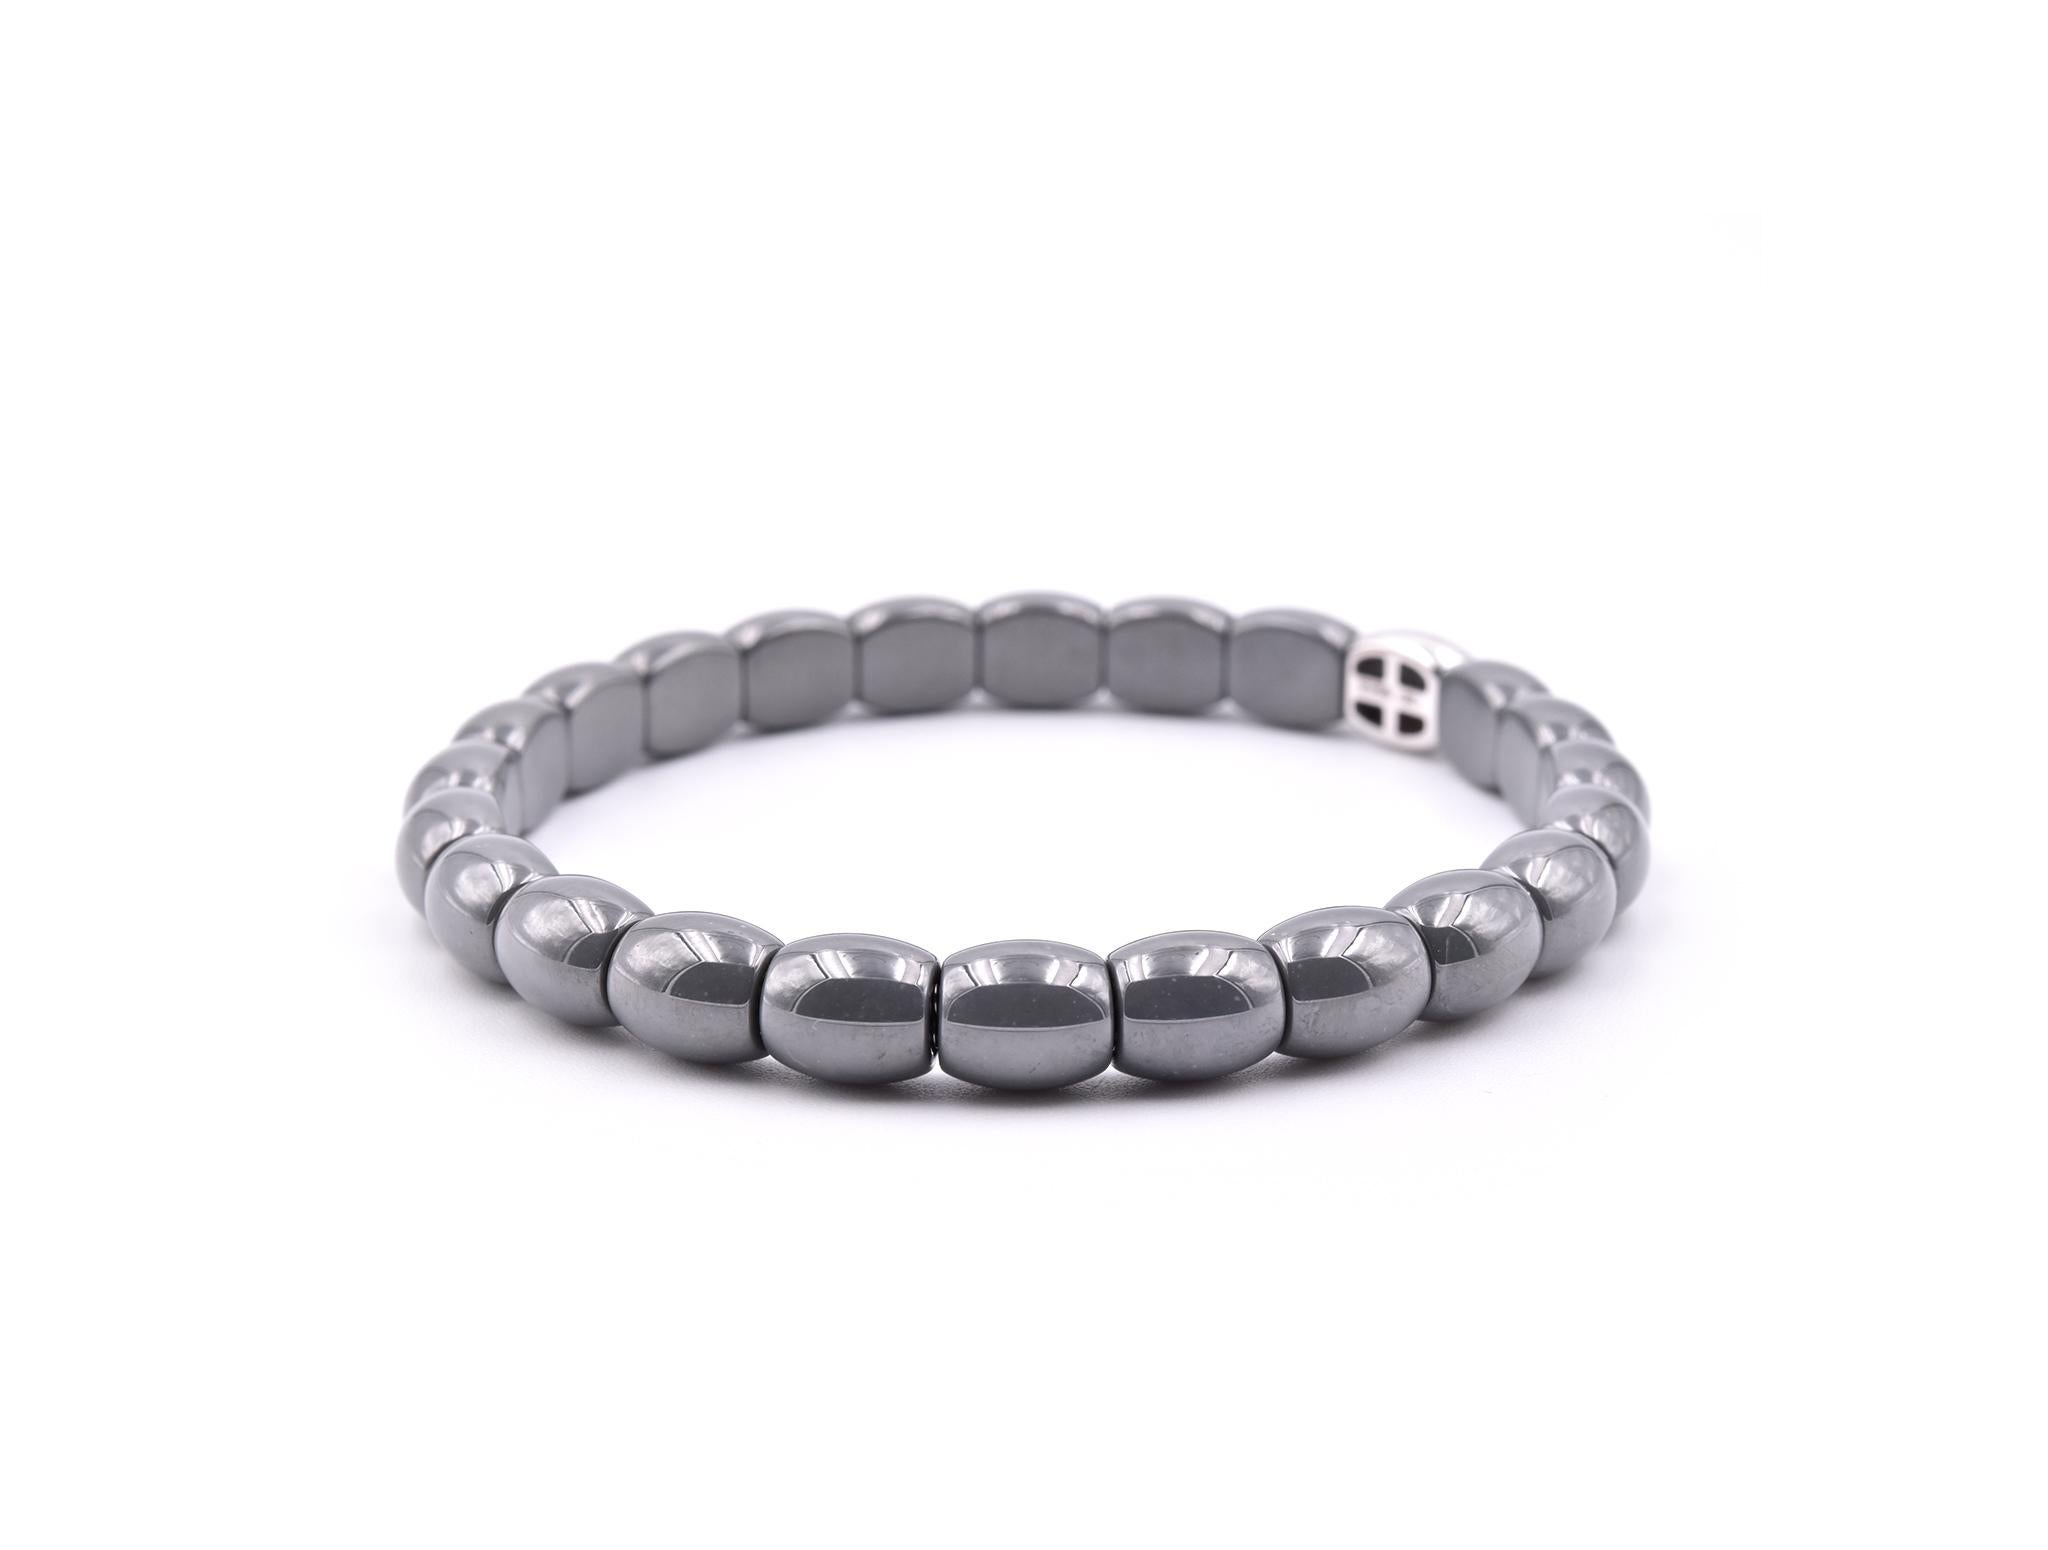 Designer: custom designed
Material: Grey Ceramic and 18K White Gold
Dimensions: bracelet will fit a 6 ½-inch wrist and it is 6.65mm wide
Weight: 20.38
